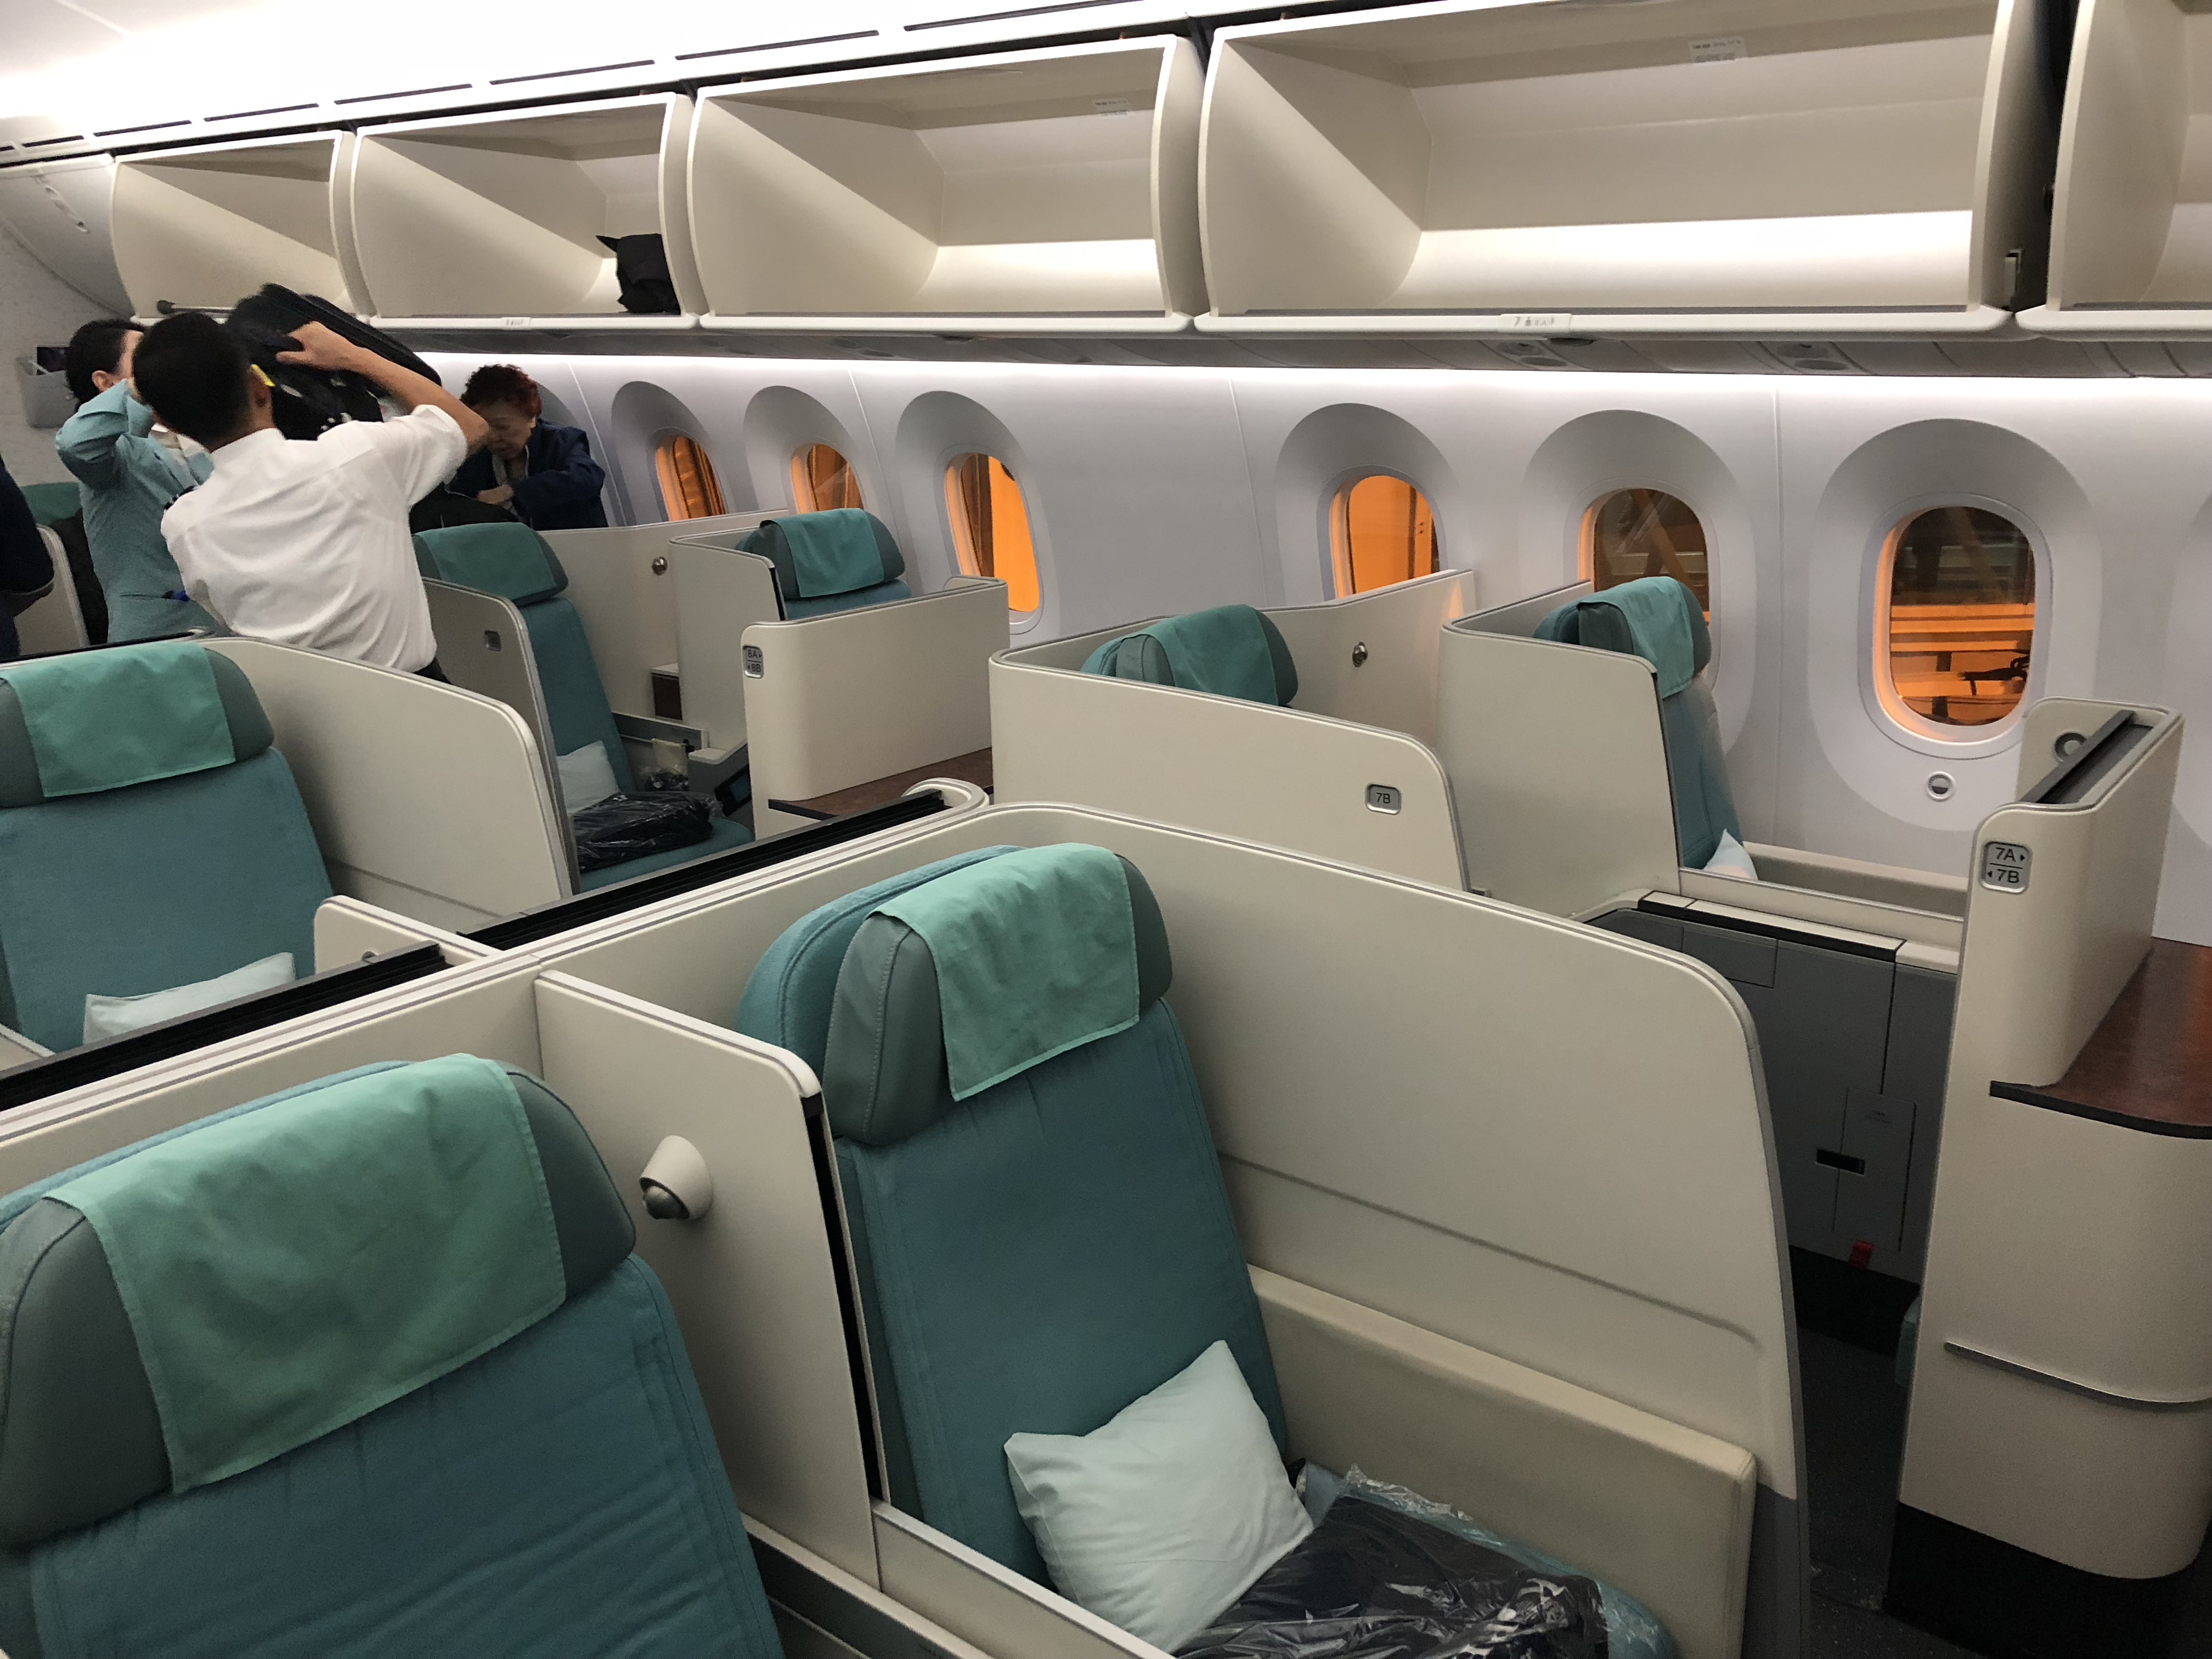 A Guide To Long-Haul Business Class Seats - Air Travel Analysis